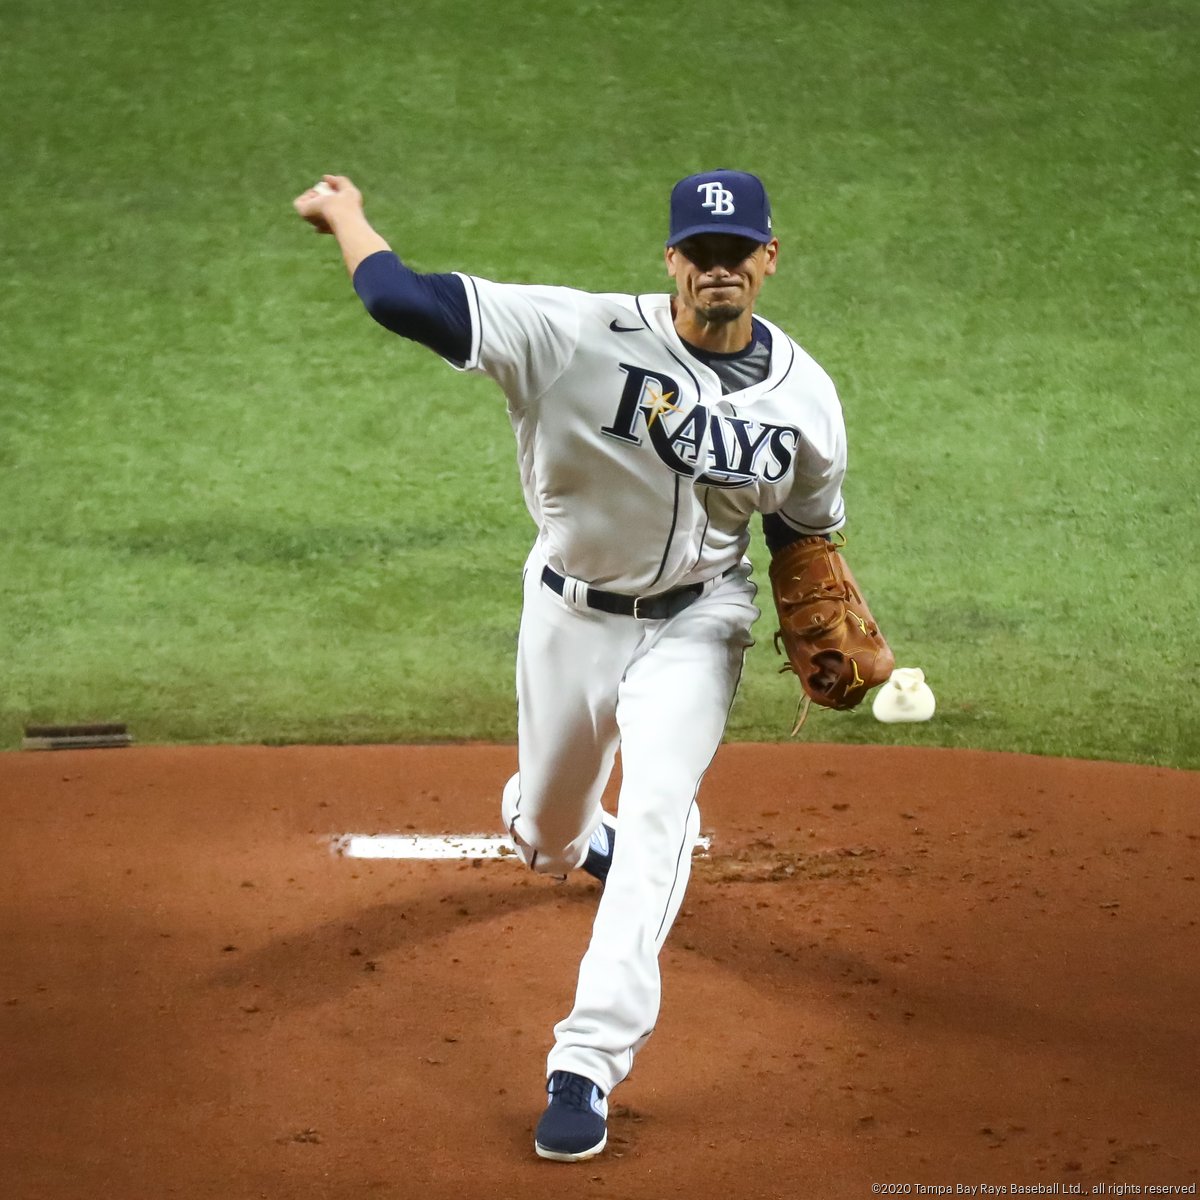 Tampa Bay Rays cost per win for 2020 season - Tampa Bay Business Journal